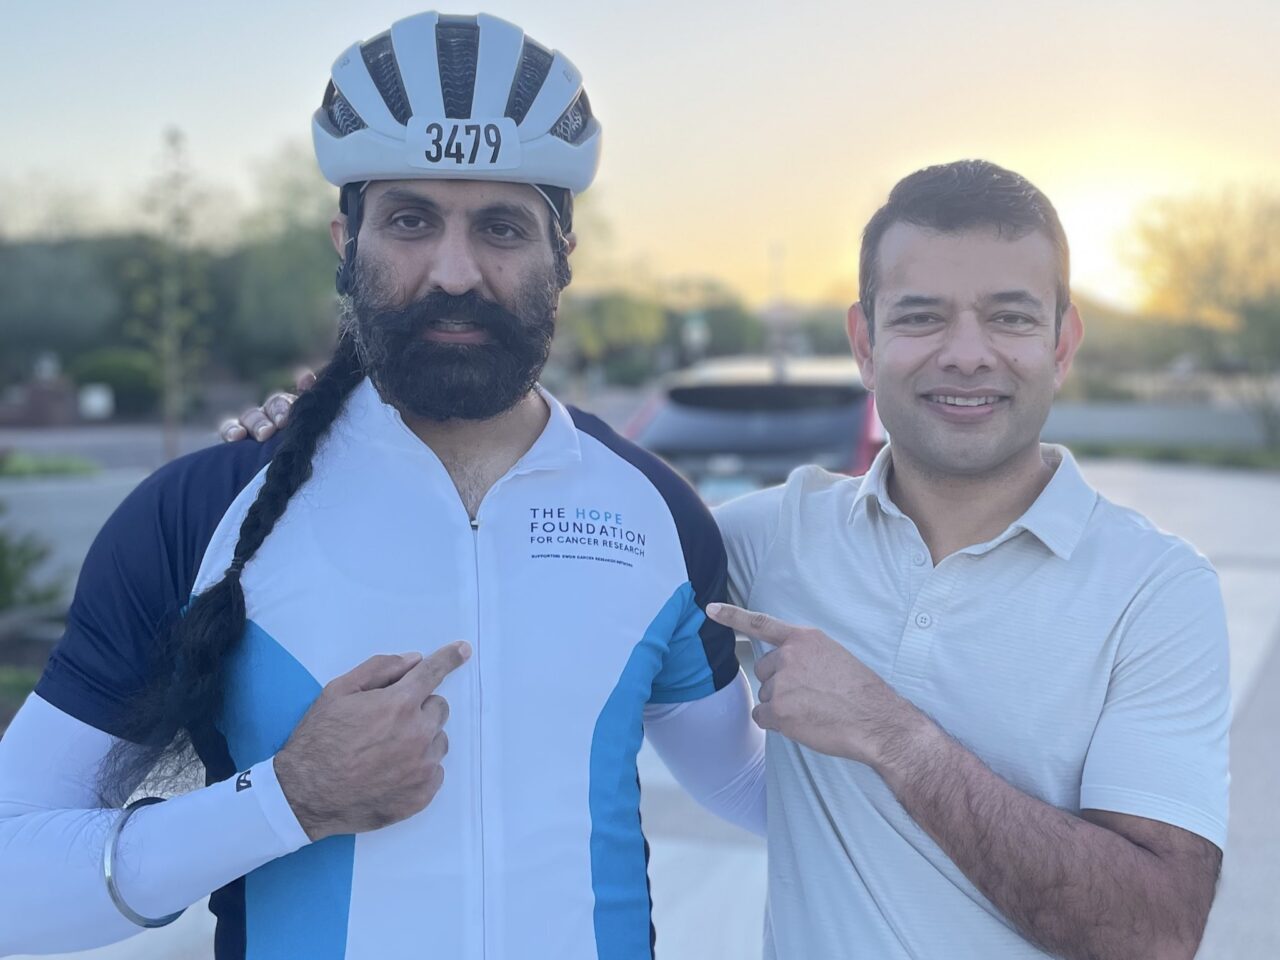 Sumanta K. Pal: Parminder Singh will be cycling 100k to support The Hope Foundation for Cancer Research!